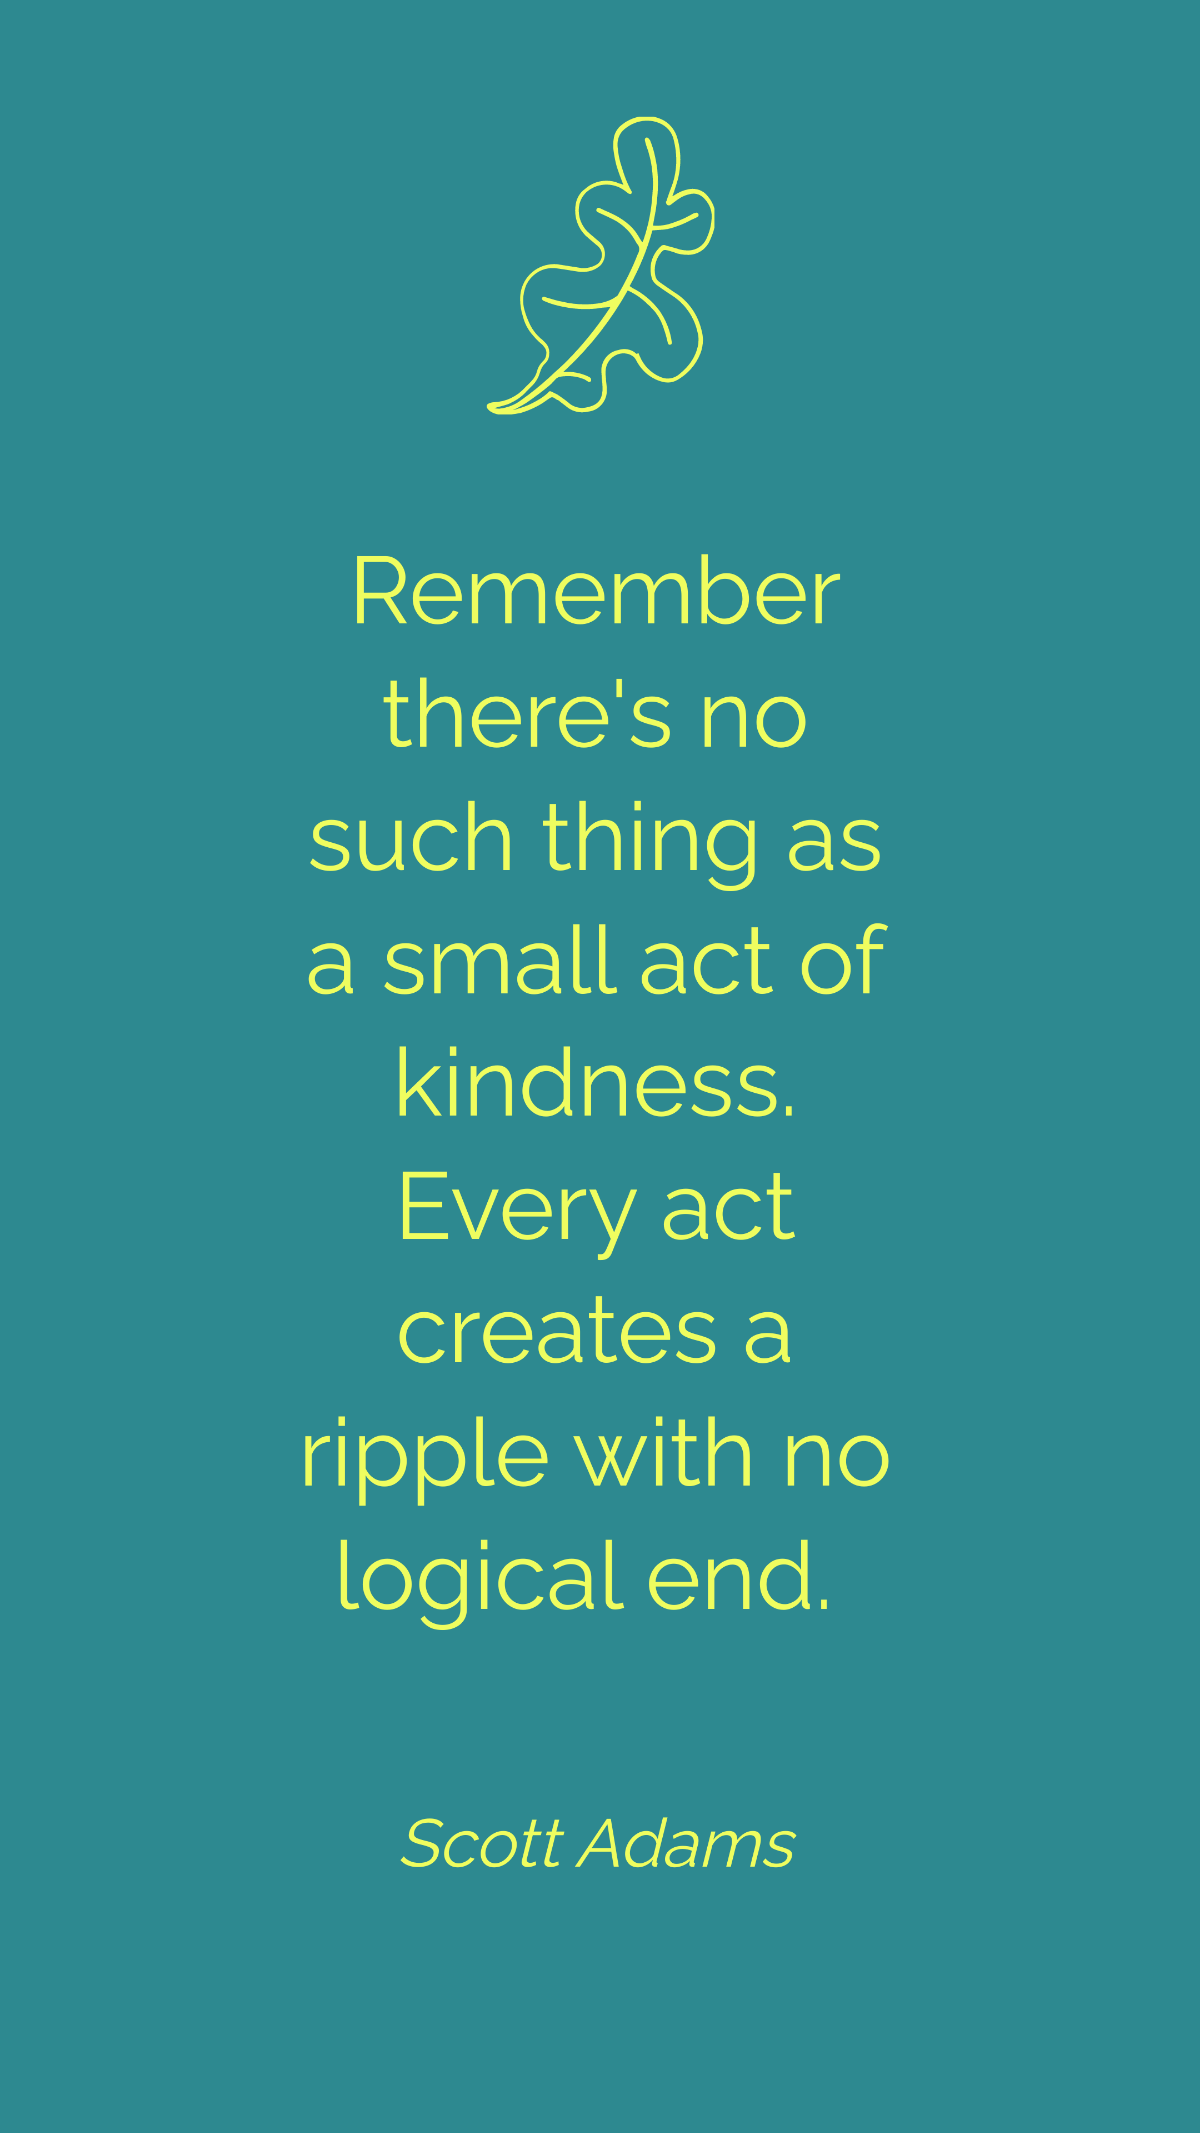 Scott Adams - Remember there's no such thing as a small act of kindness. Every act creates a ripple with no logical end.  Template